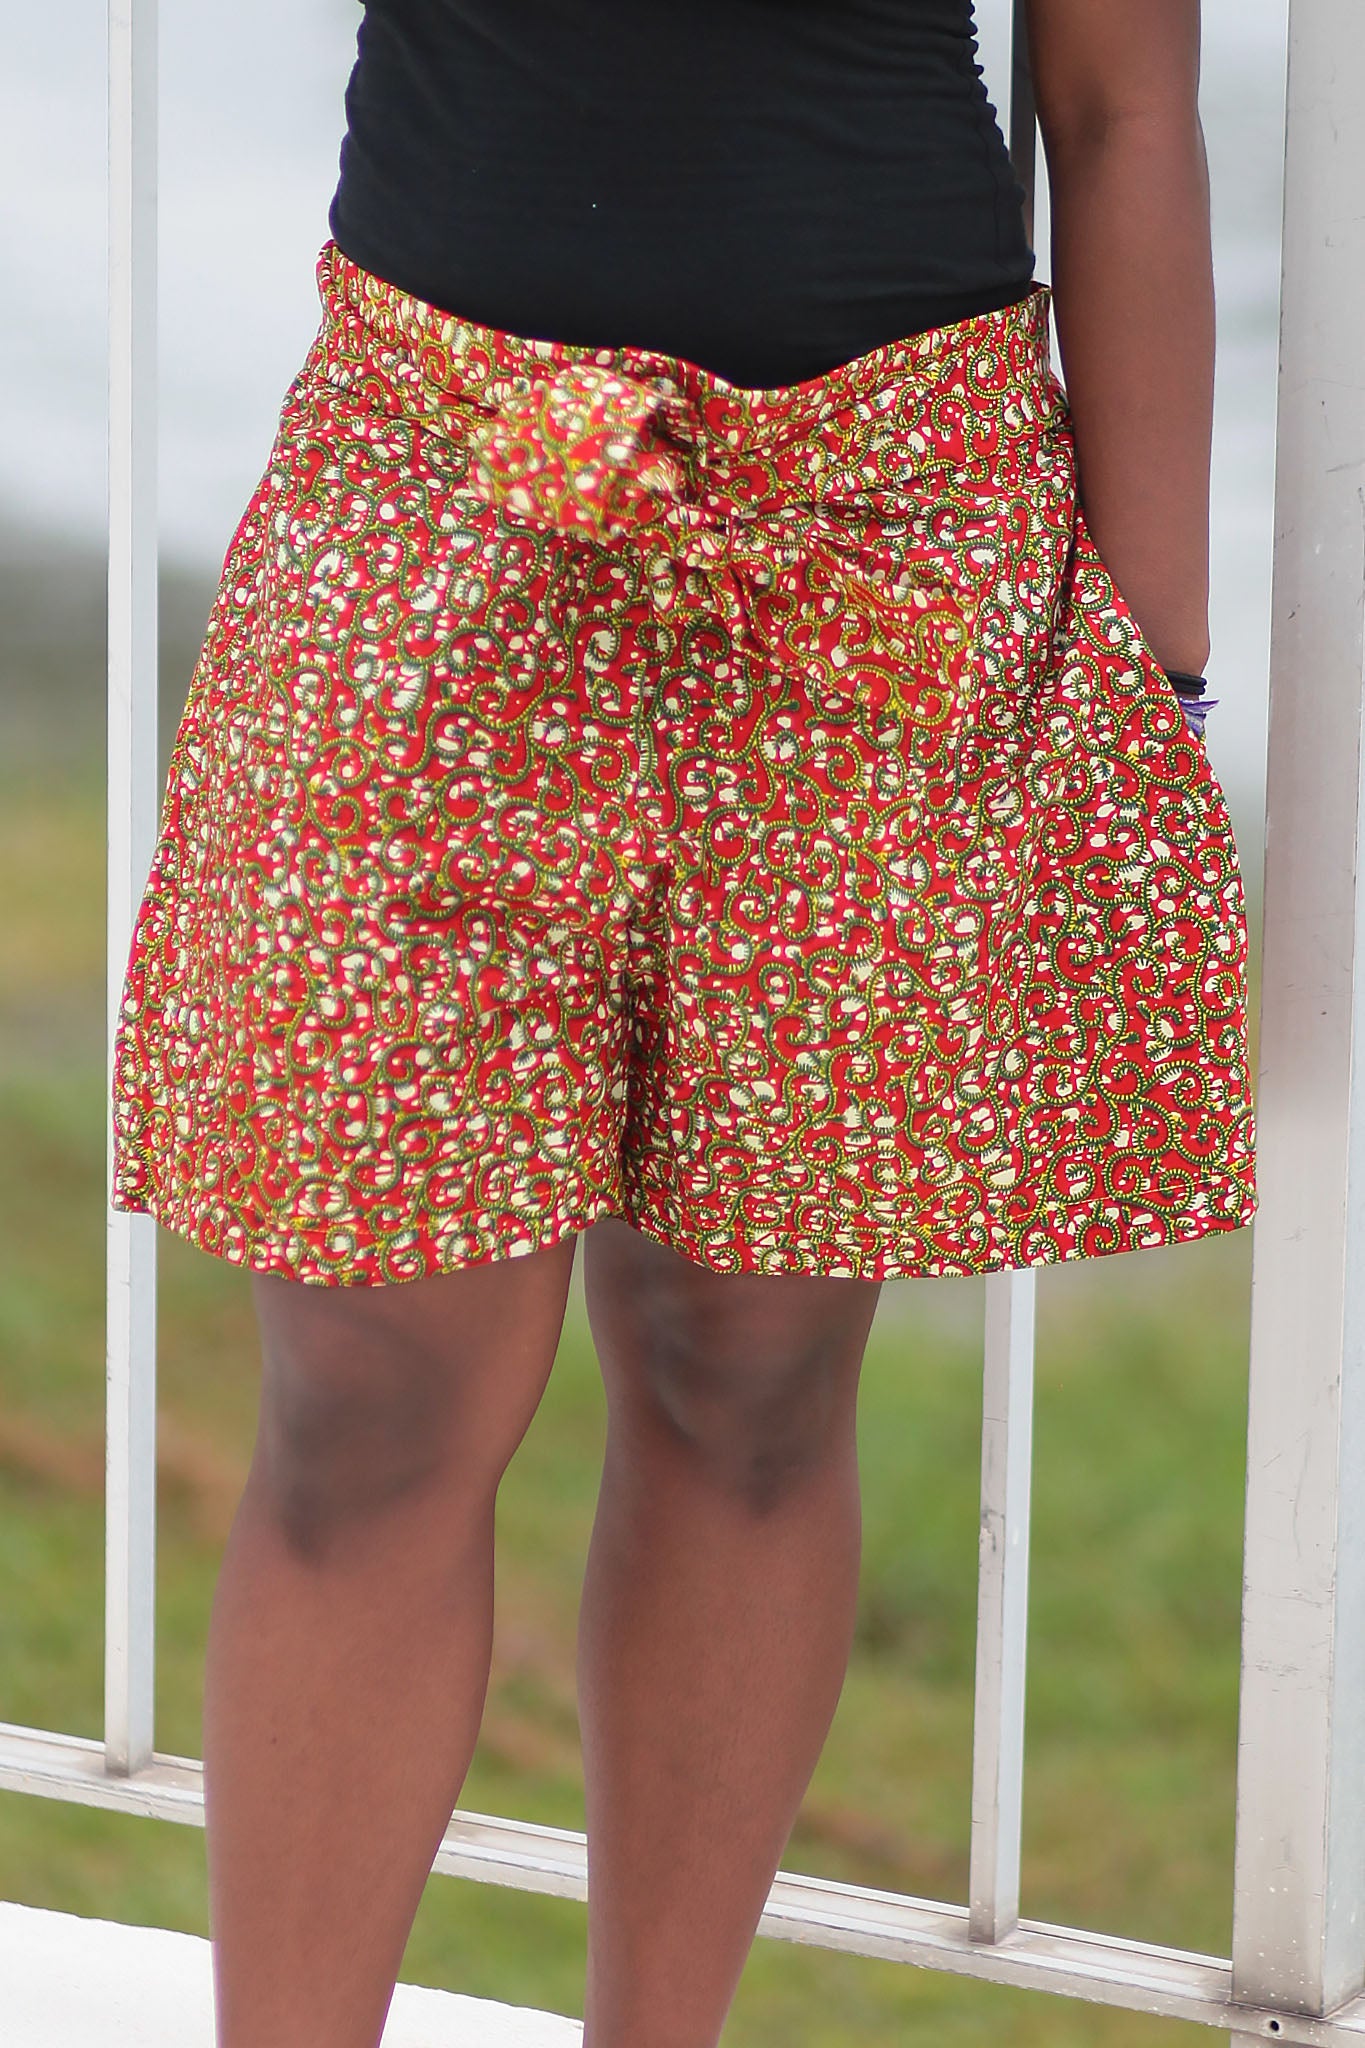 African Print/Kitenge Beach Shorts-Double Sided Shorts Red and White Spotted Print - Africas Closet